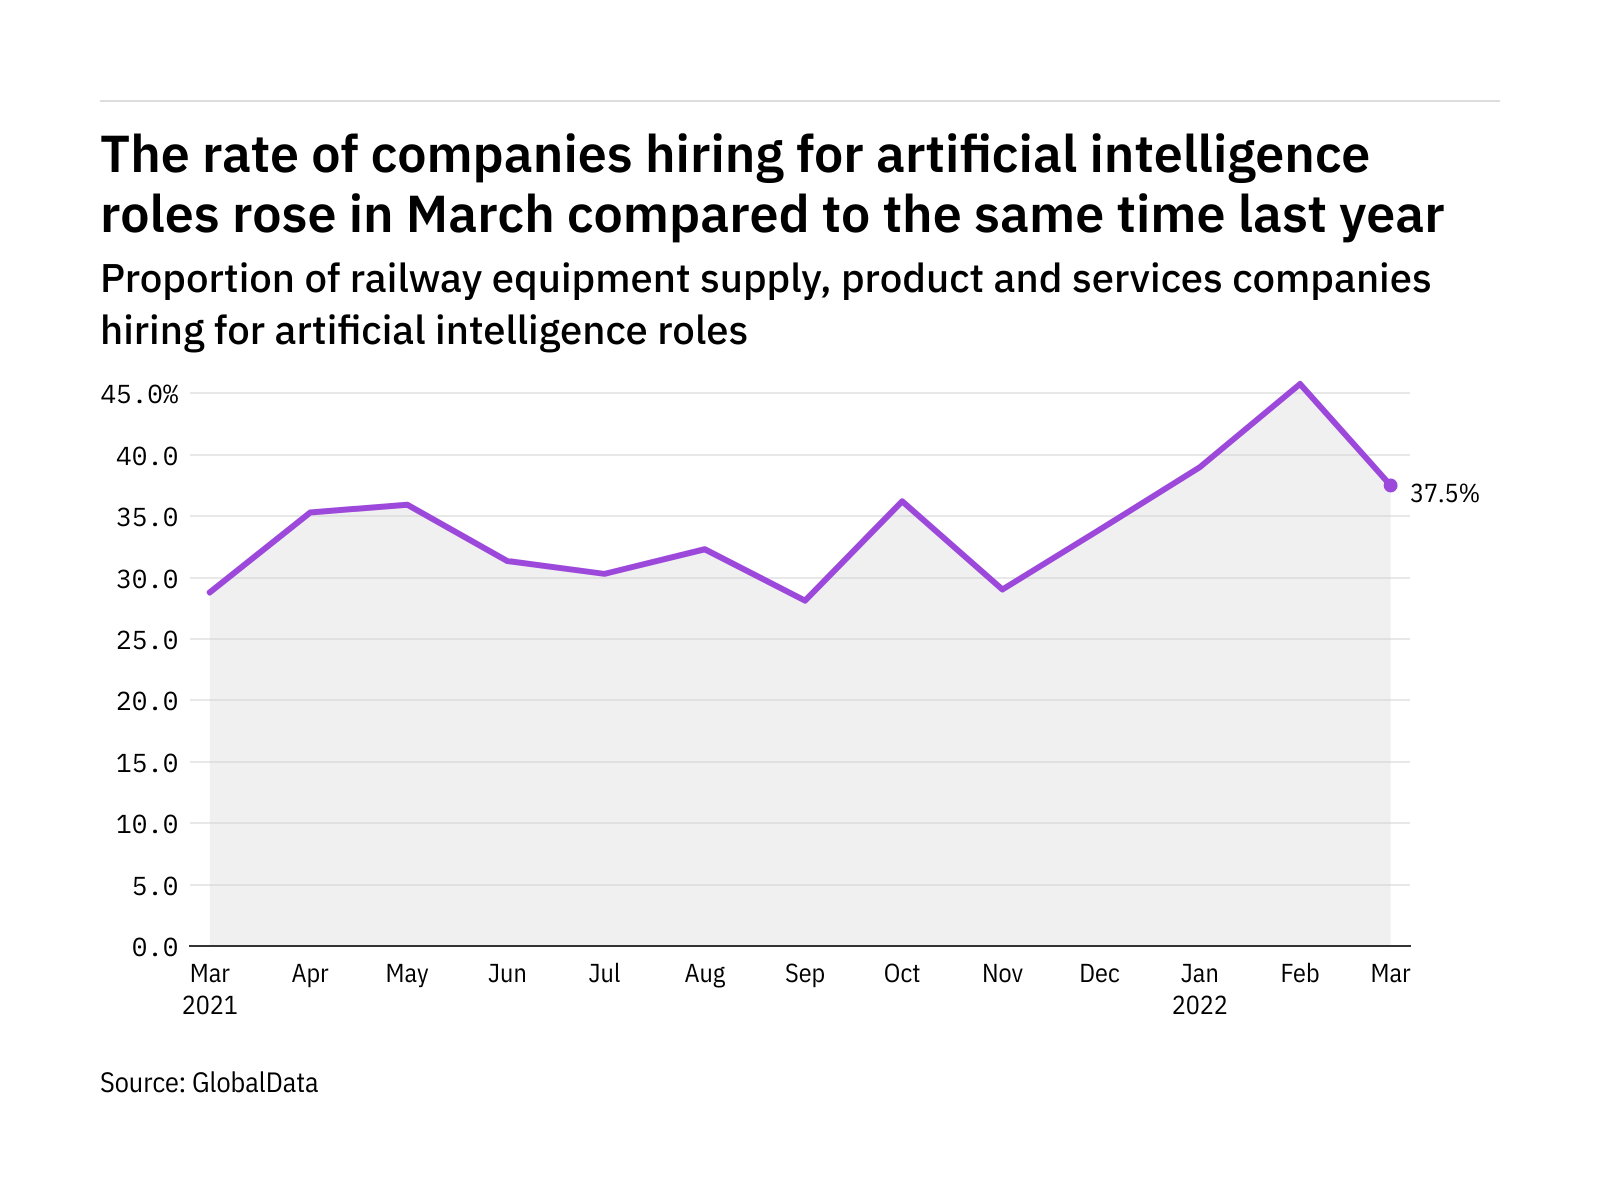 Artificial intelligence hiring levels in the railway industry rose in March 2022